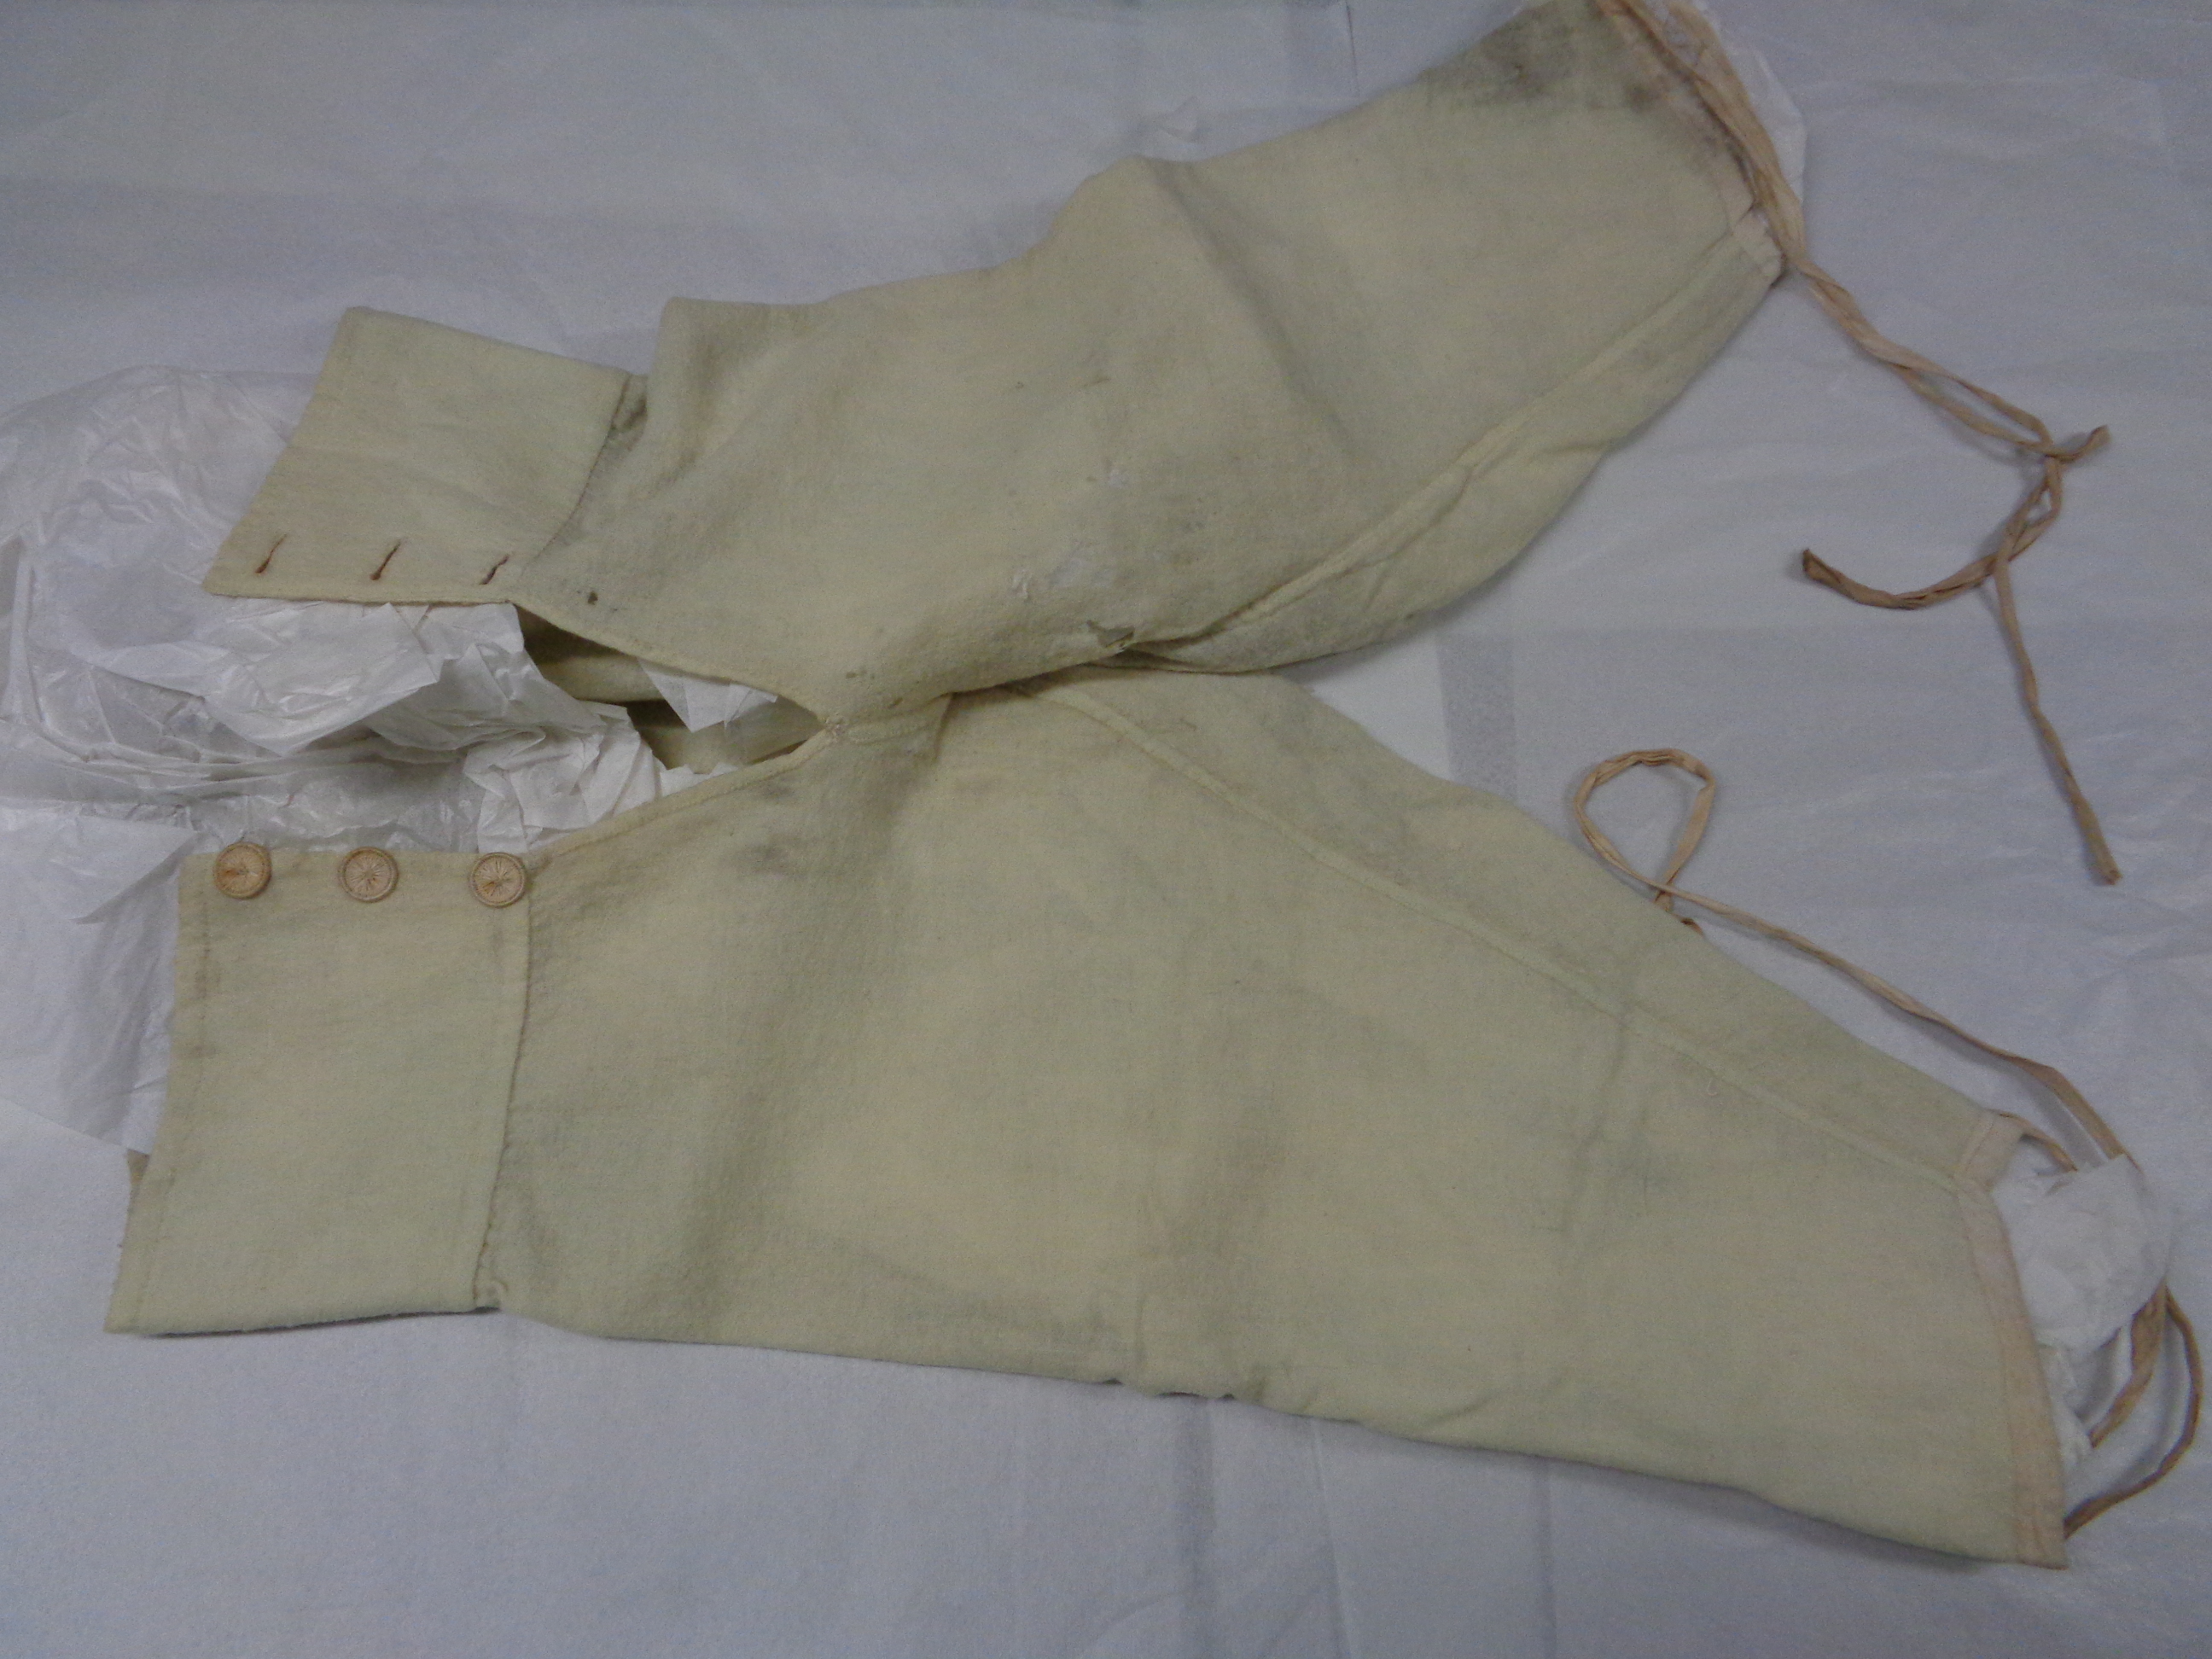 napoleonic underwear, what soldier wore in the 18th and 19th century, what kind of underwear did people wear in the 18th and 19th c, hadn made historical costume, replica and researched period costume, costumes based on museum